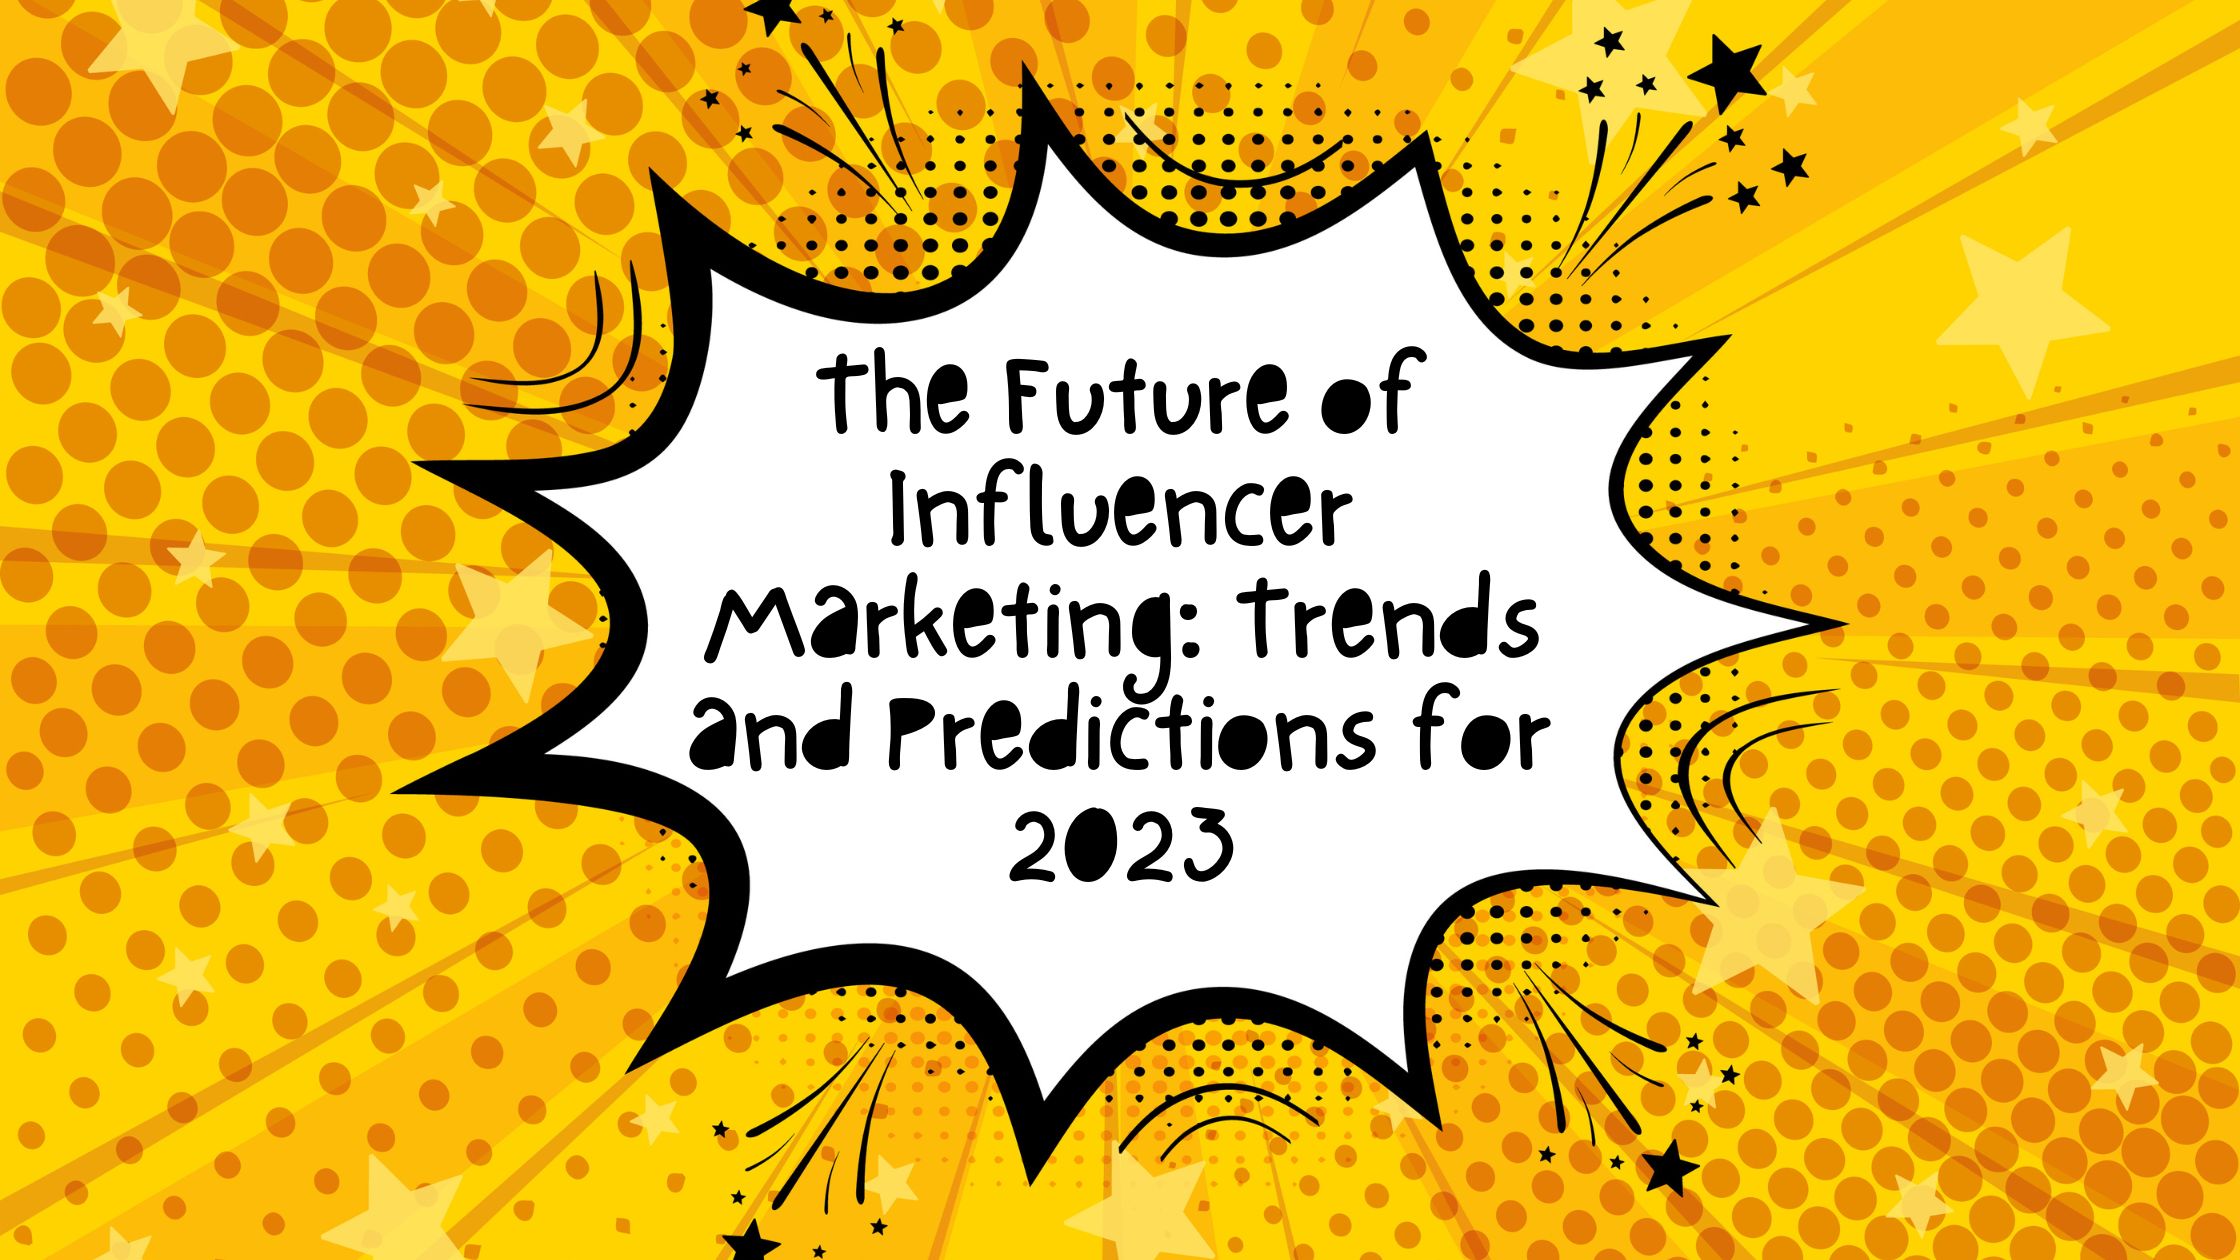 The Future of Influencer Marketing: Trends and Predictions for 2023